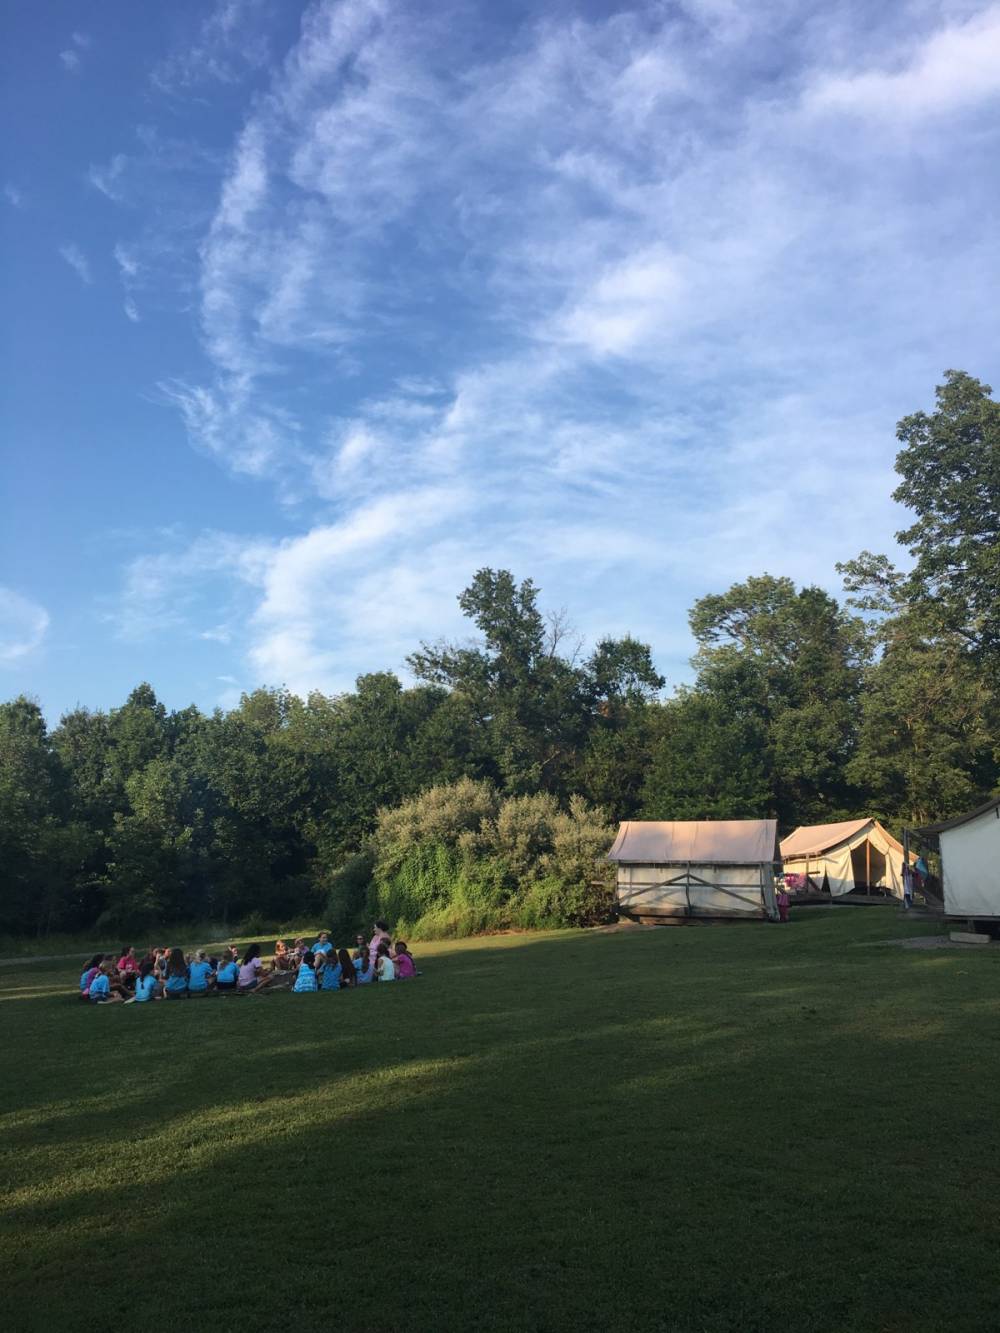 TOP NEW JERSEY ACADEMIC CAMP: Camp Agnes DeWitt is a Top Academic Summer Camp located in Hillsborough New Jersey offering many fun and enriching Academic and other camp programs. Camp Agnes DeWitt also offers CIT/LIT and/or Teen Leadership Opportunities, too.